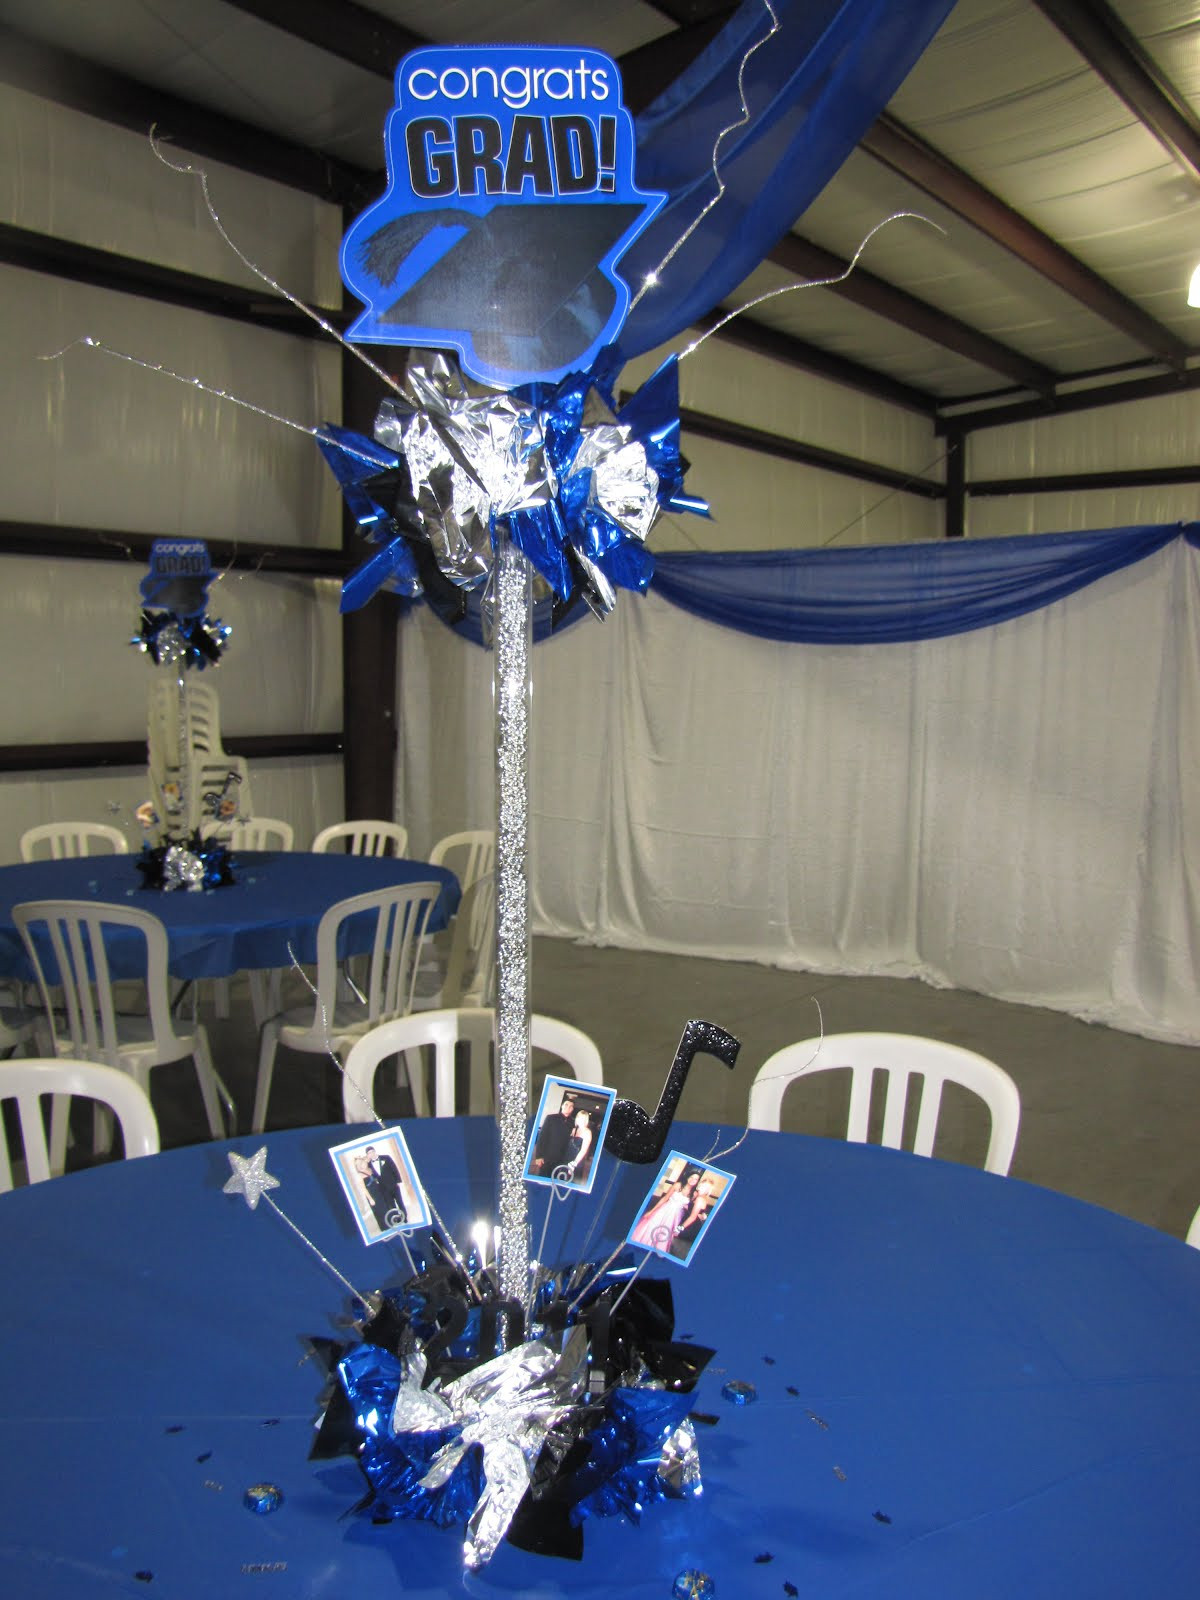 Red And Blue Graduation Party Ideas
 Party People Event Decorating pany Graduation Decor